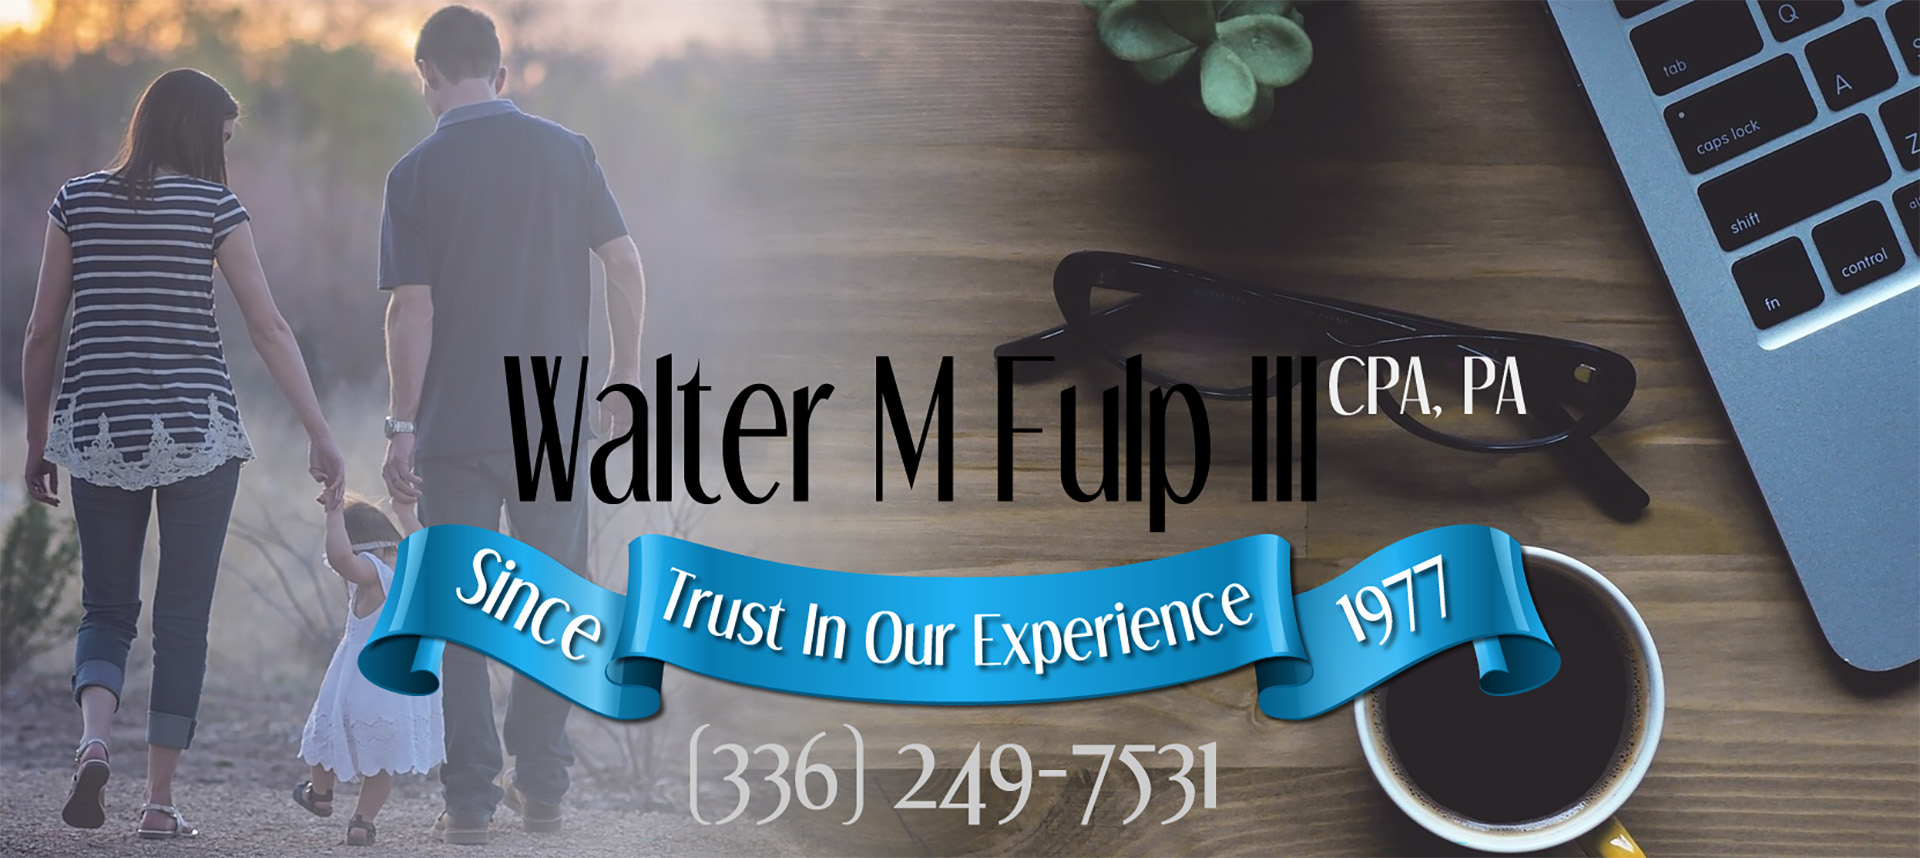 Welcome to Walter Fulp CPA